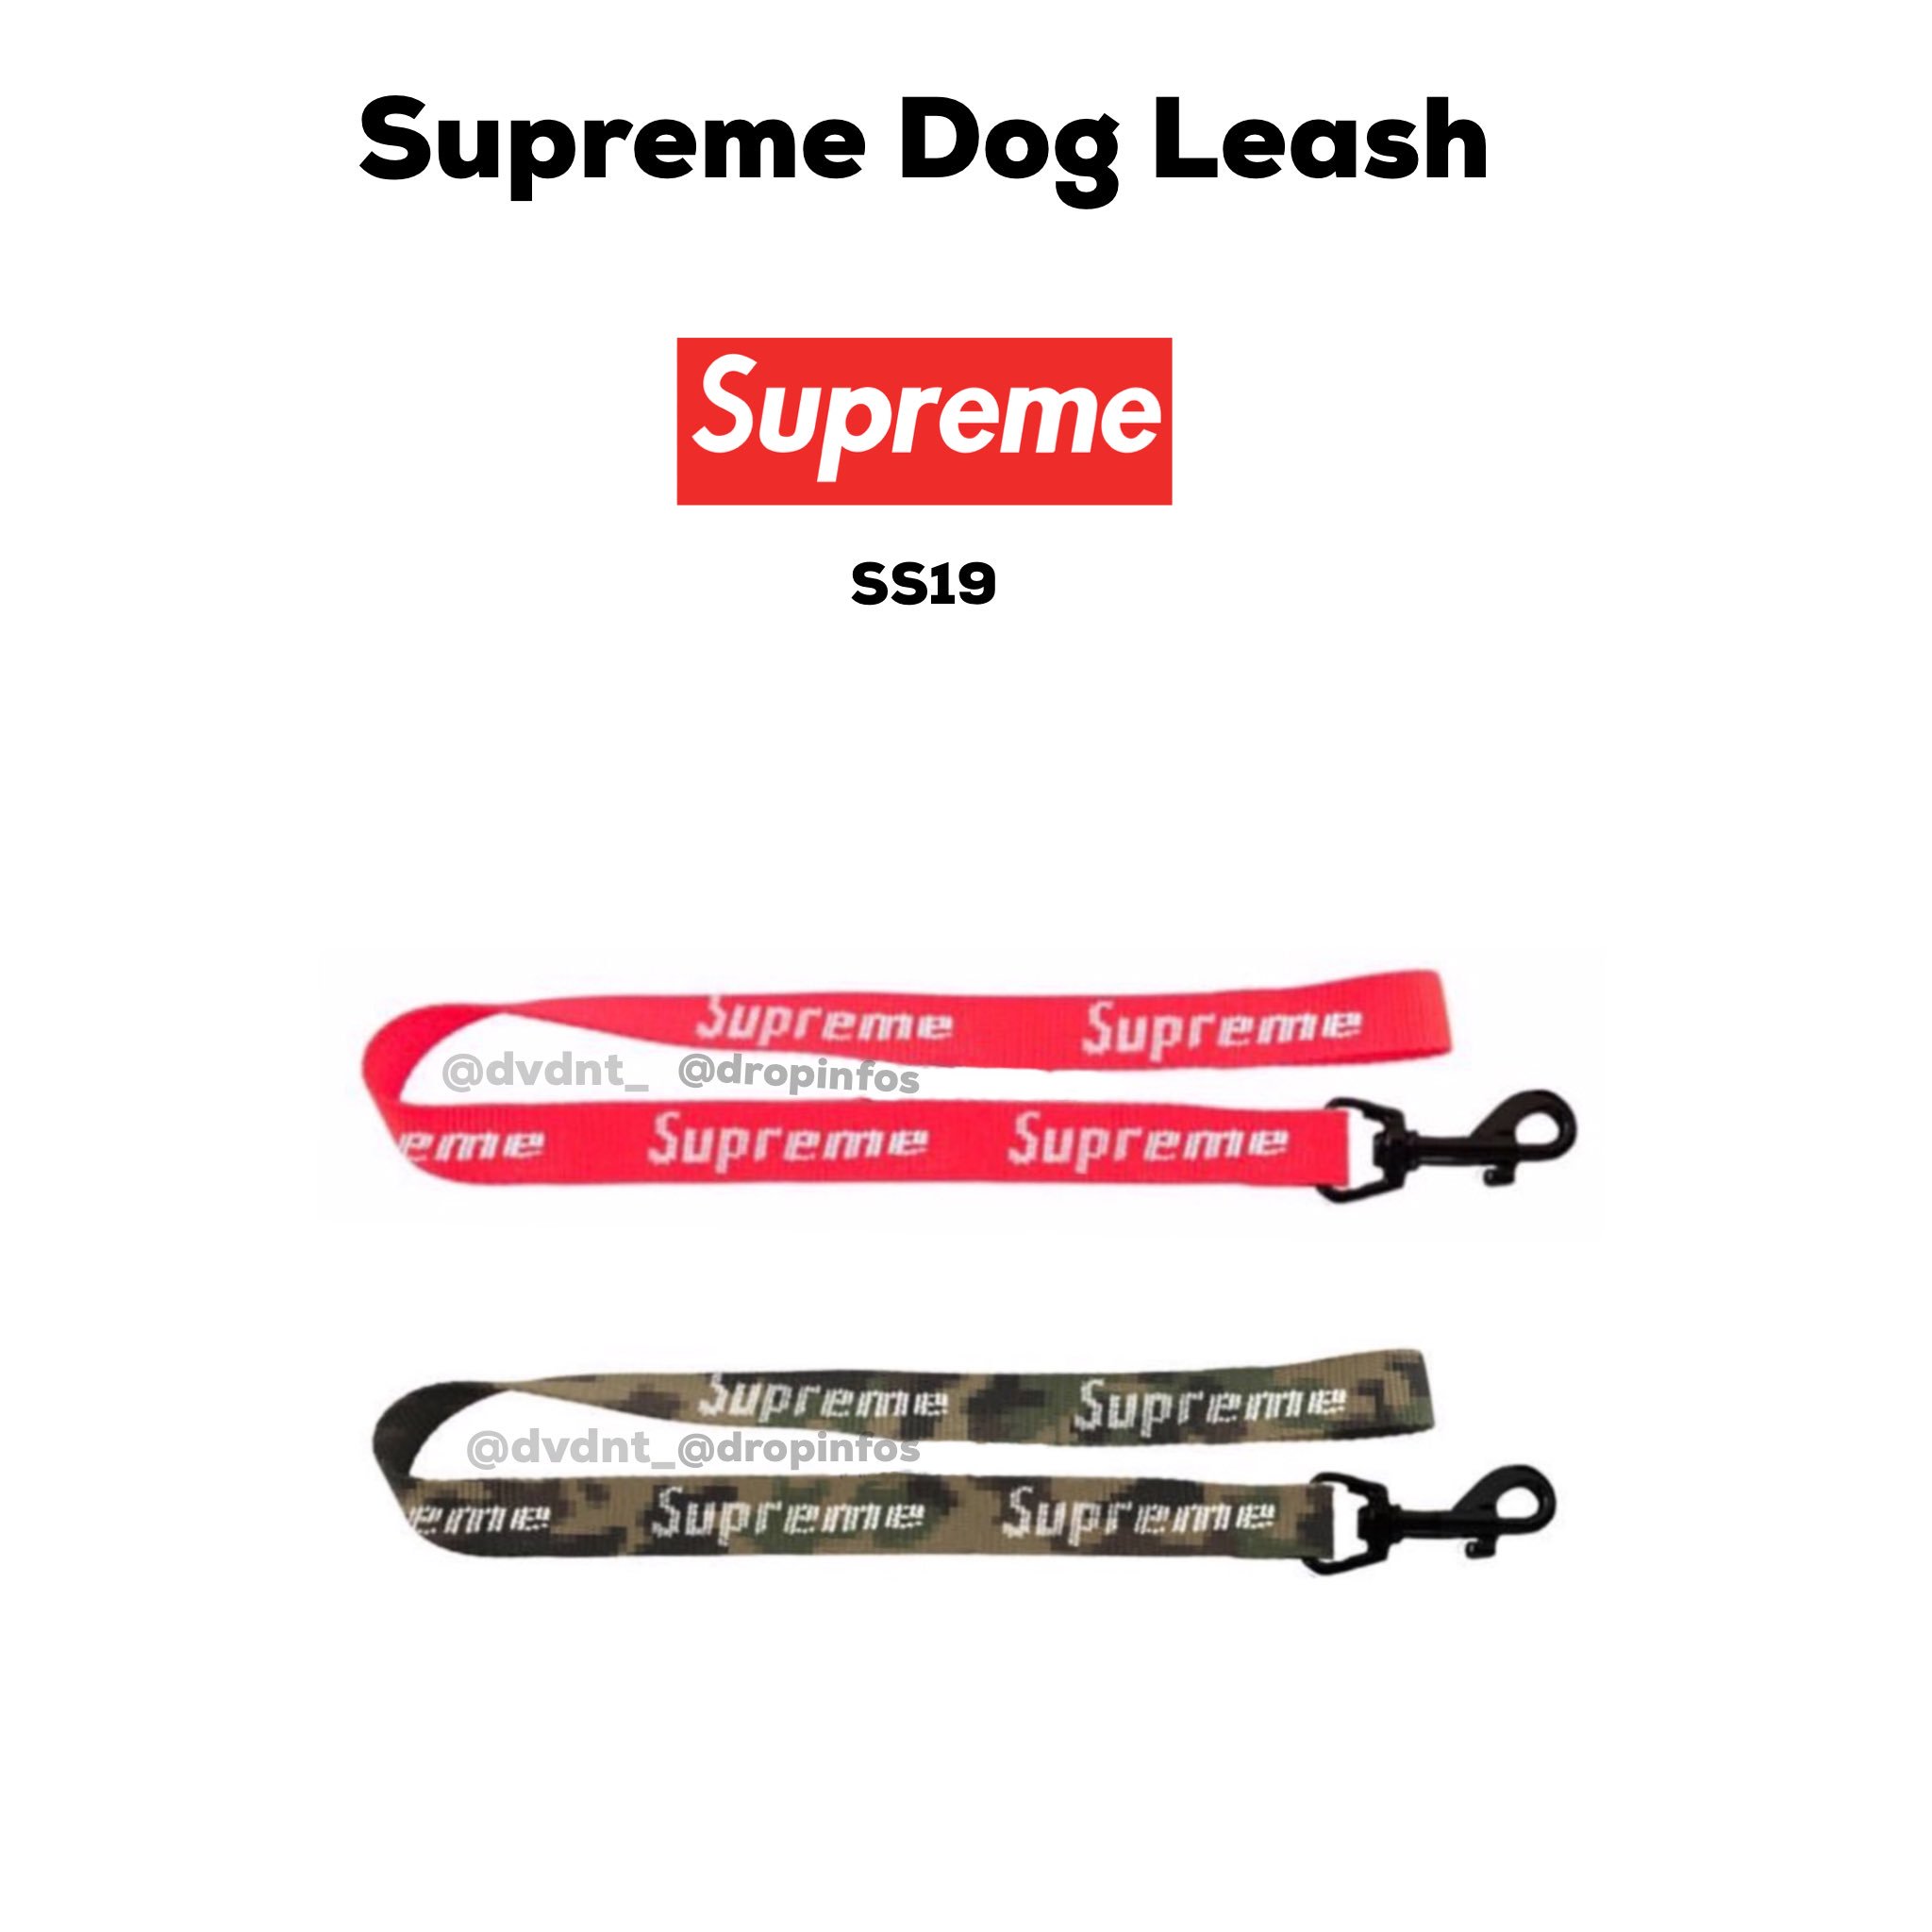 Download Dropinfos On Twitter Supreme Dog Leash Leaked Could Be Releasing In 2019 Picture Is A Mock Up Based On Actual Product Dvdhnt Thoughts Don T Forget To Drop A Follow Dropinfos For